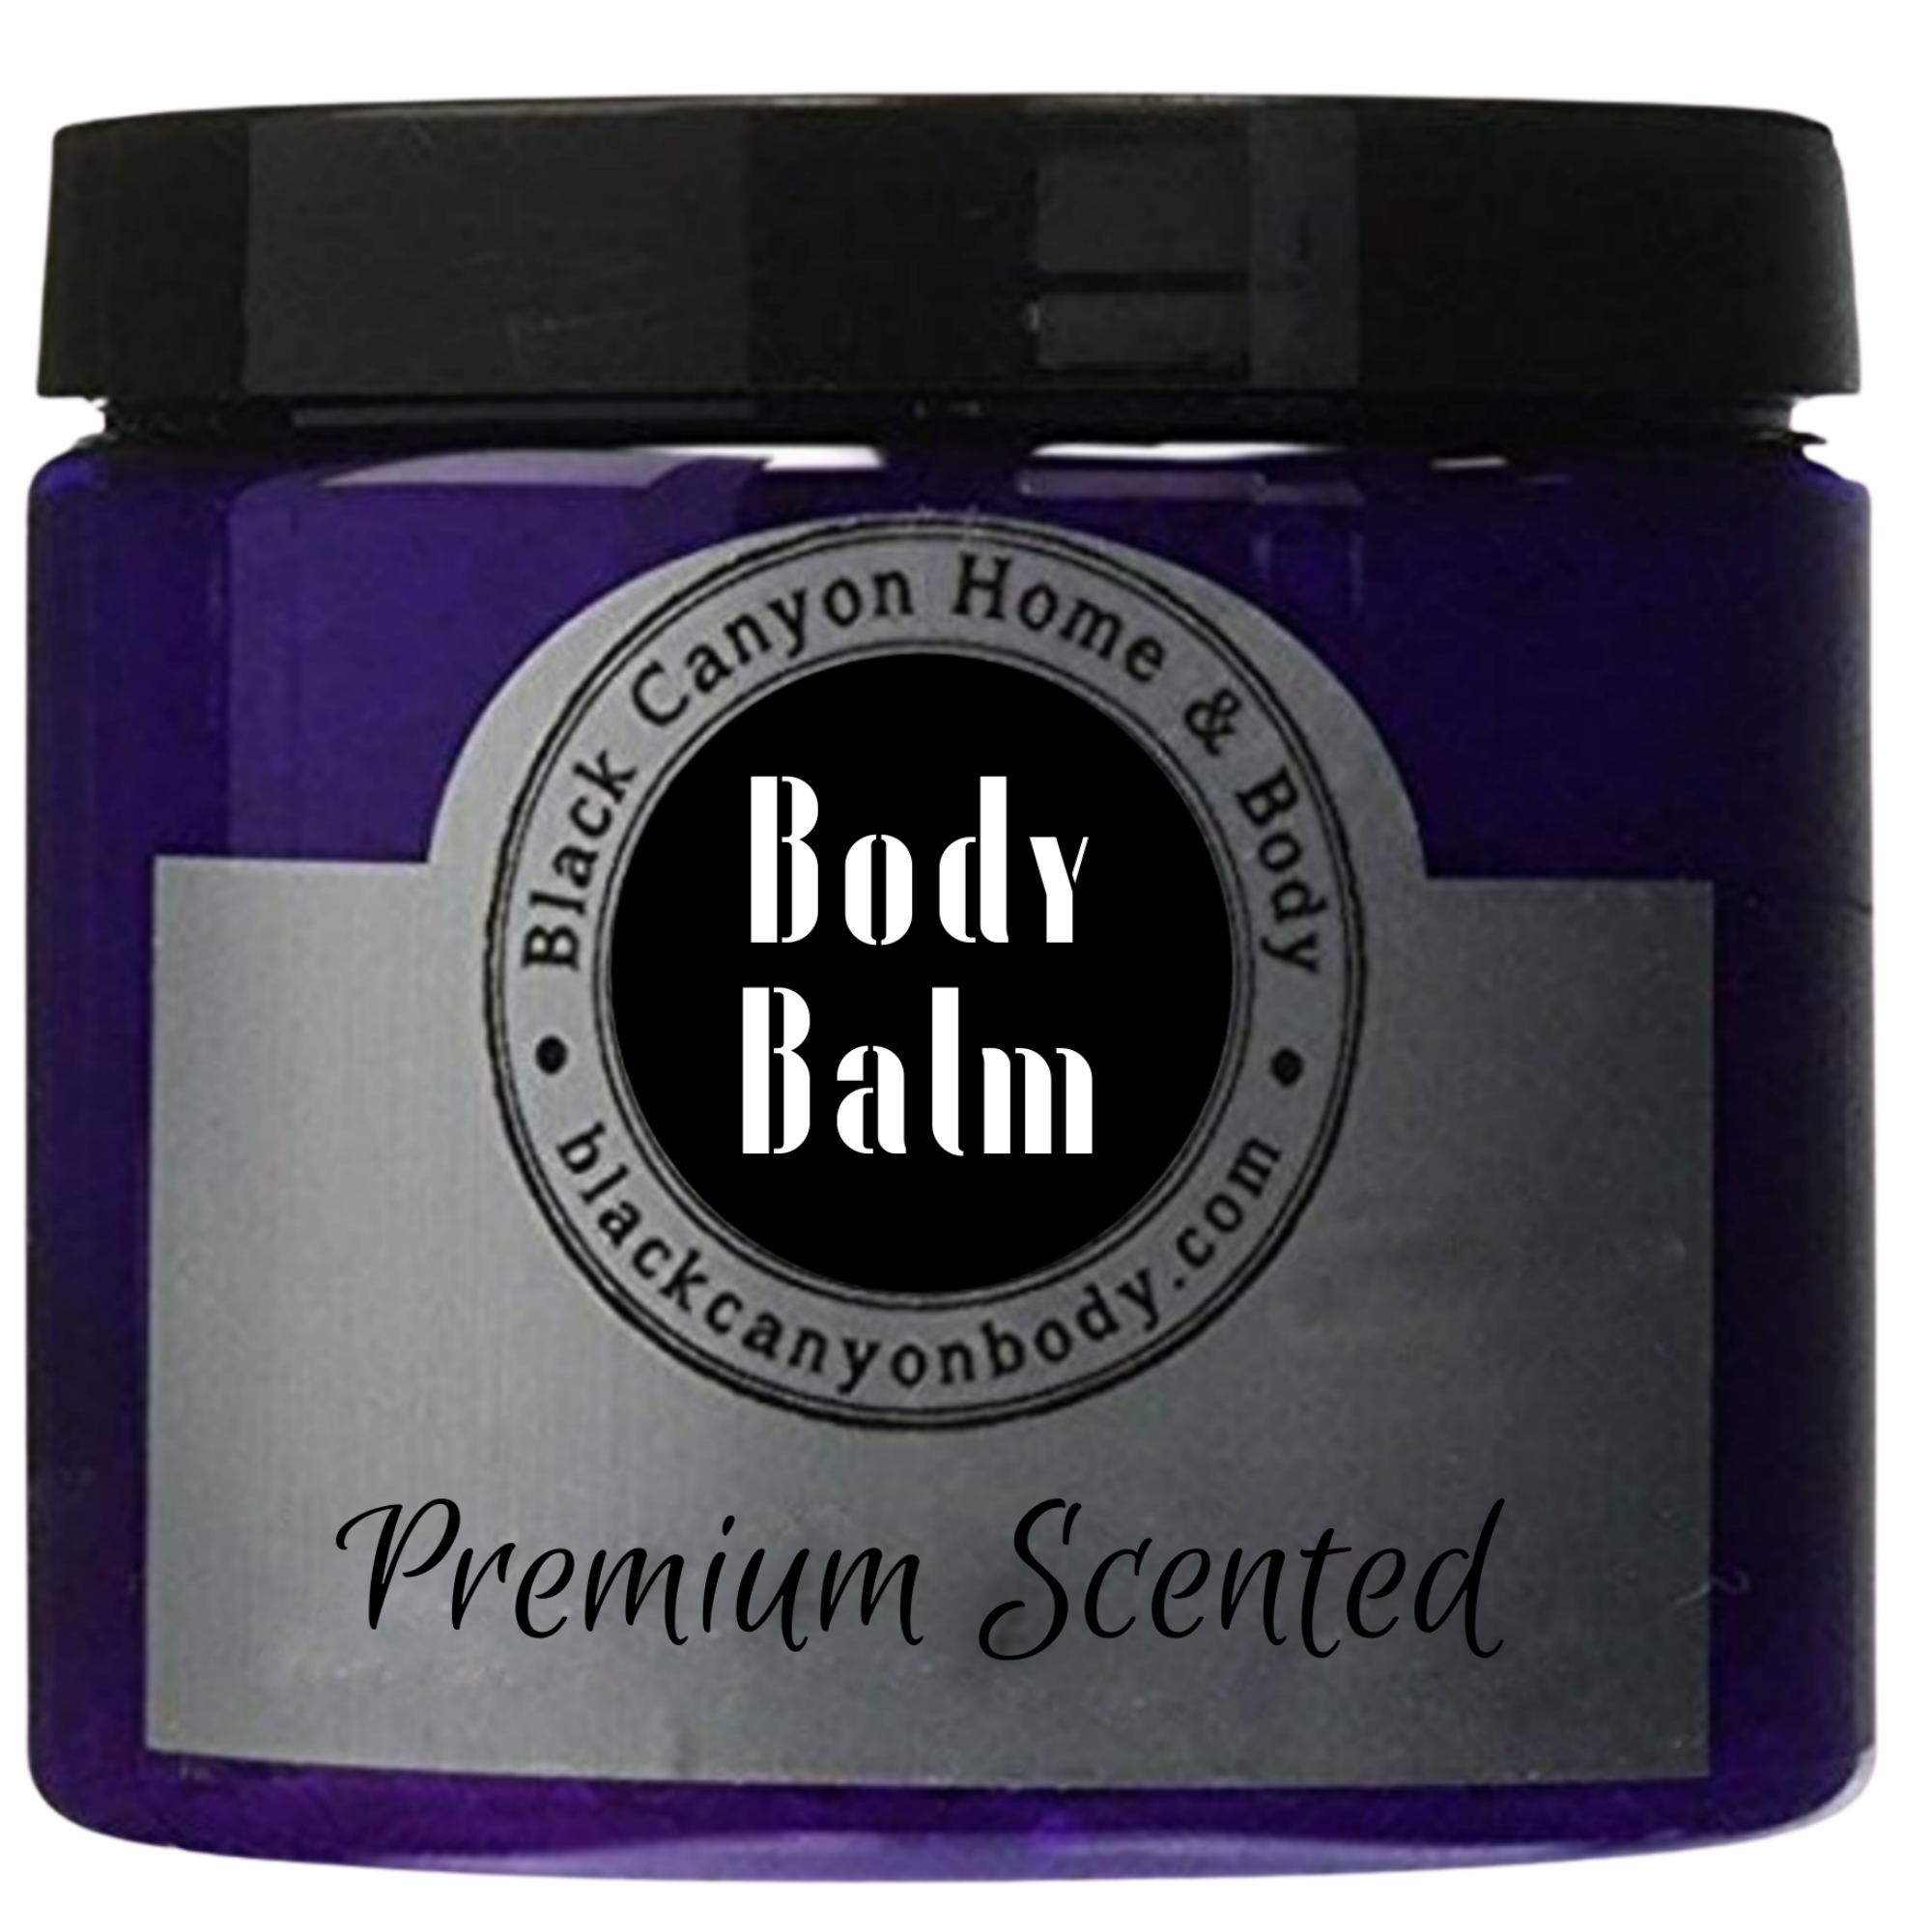 Black Canyon Black Currant Champagne Scented Natural Body Balm with Shea